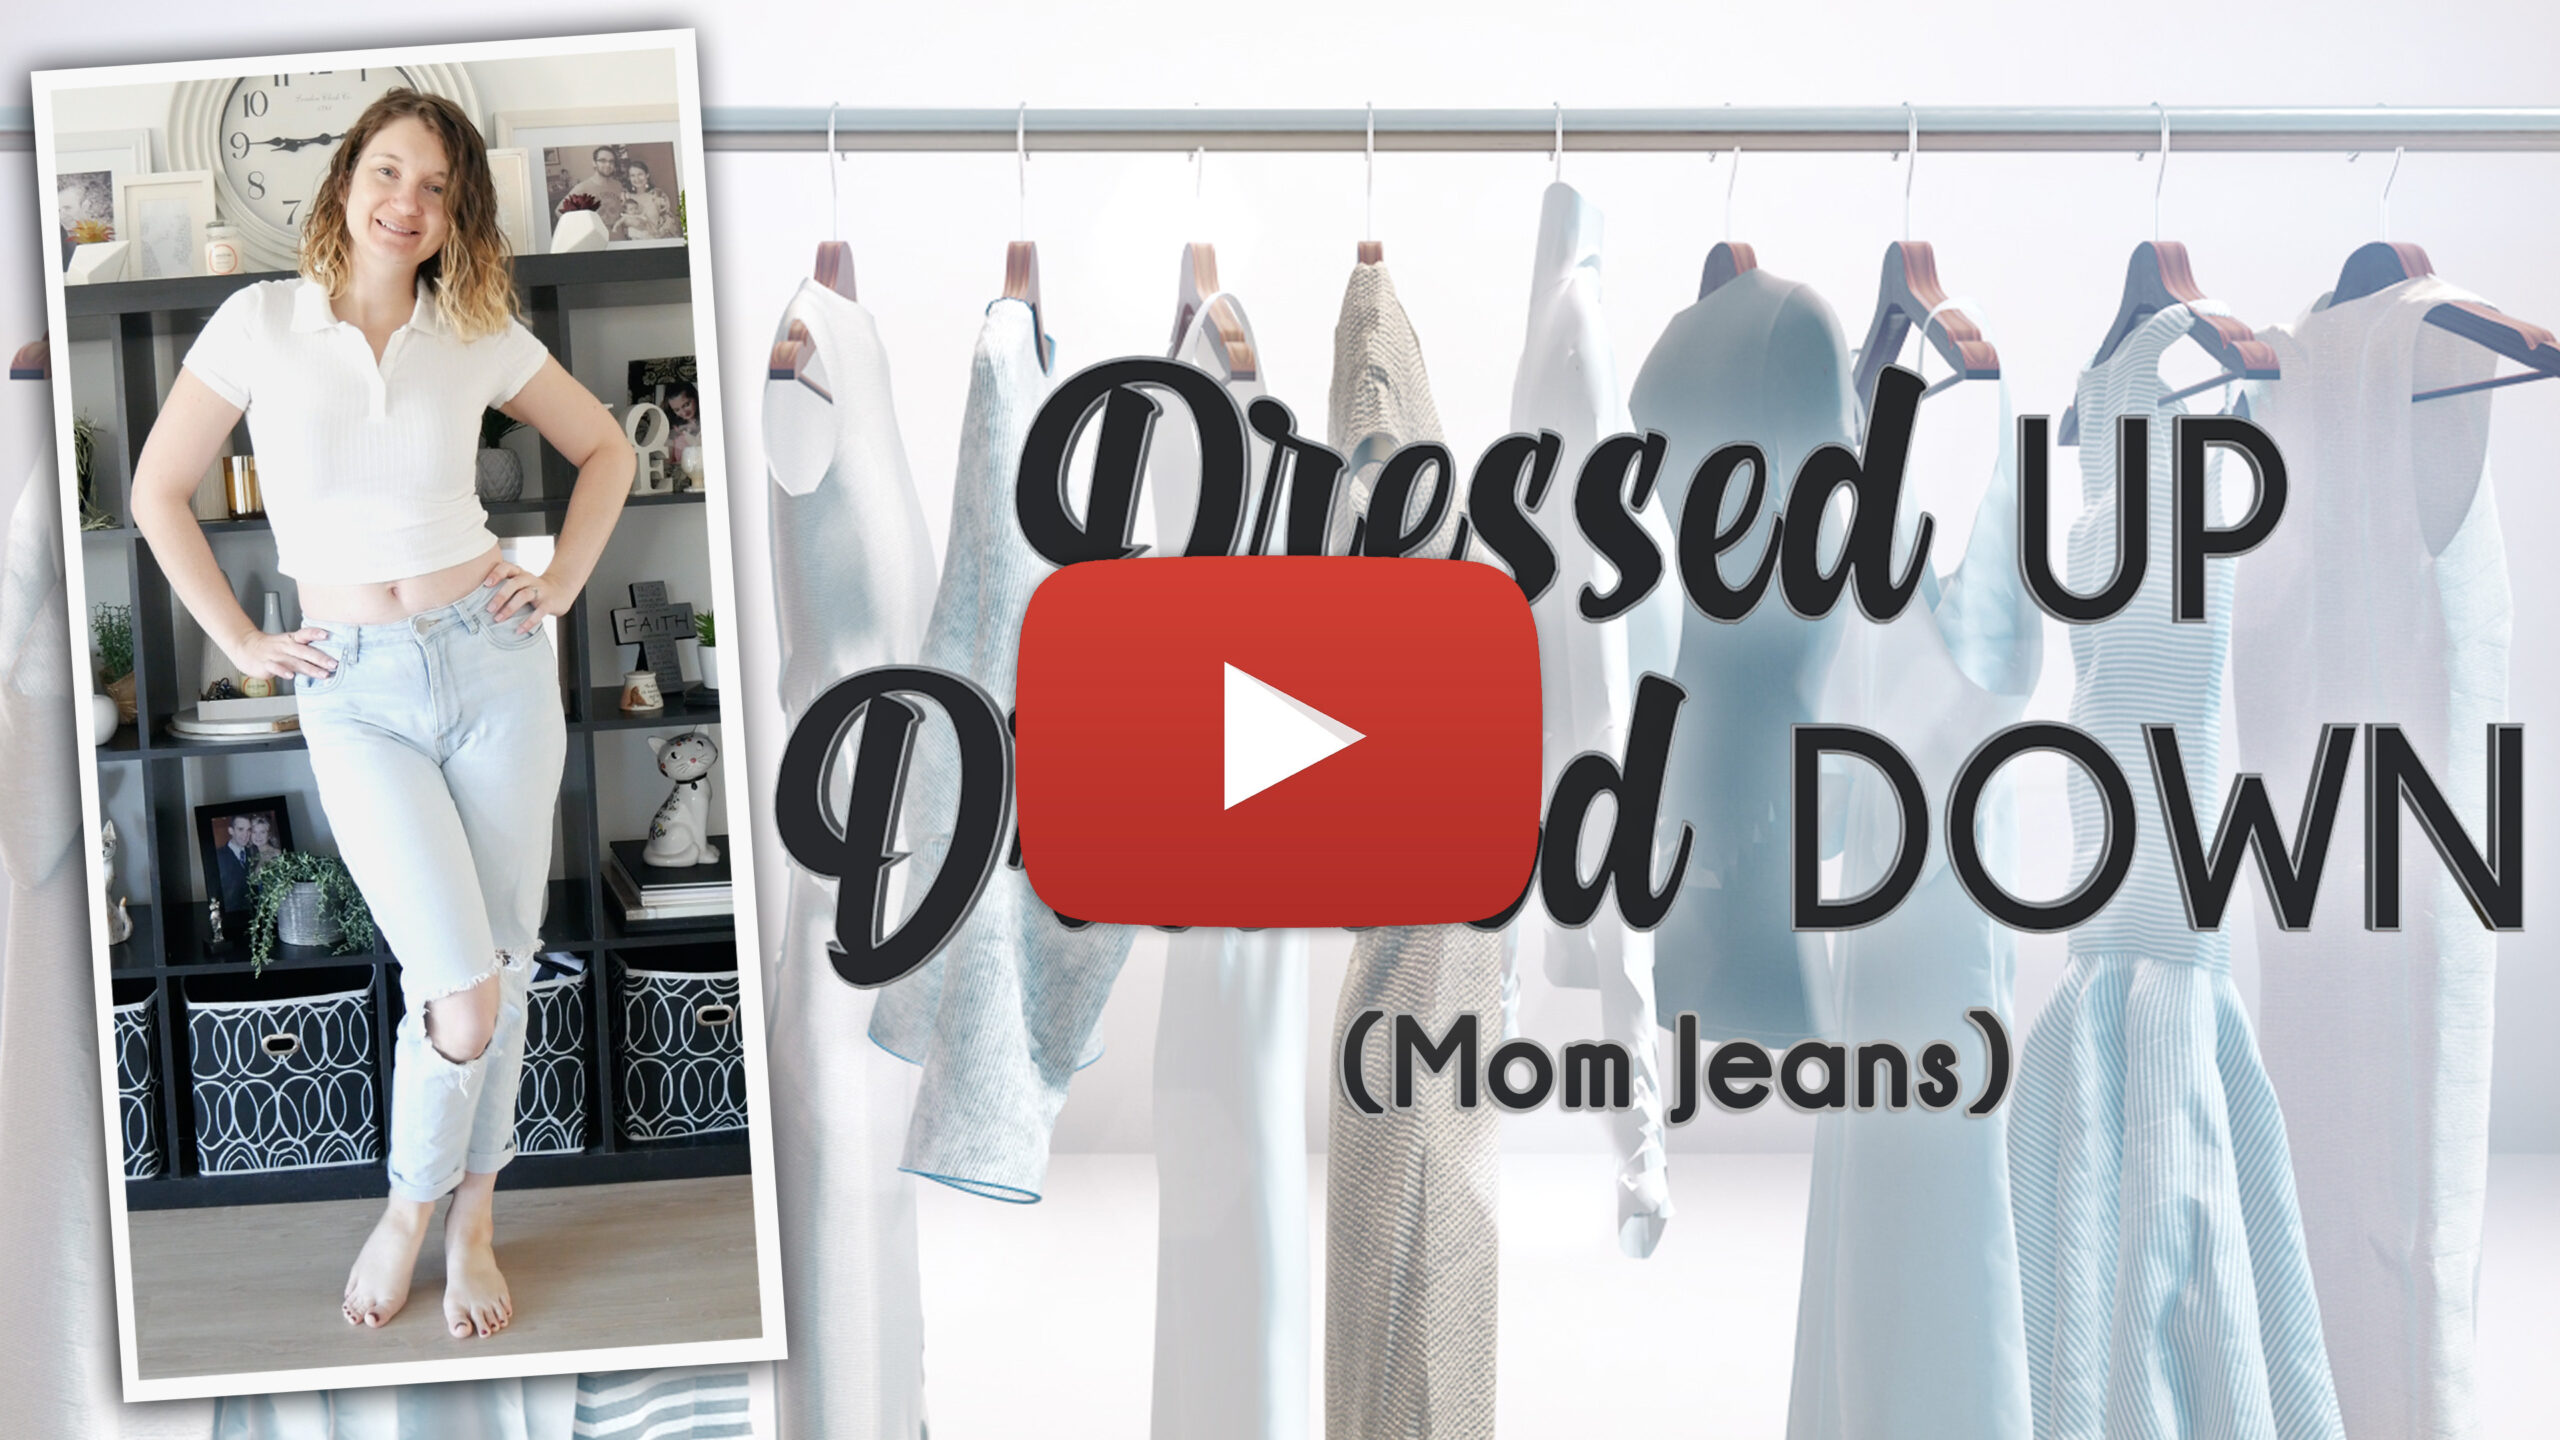 Dressed Up Dressed Down (Mom Jeans) Youtube Thumbnail Play Button